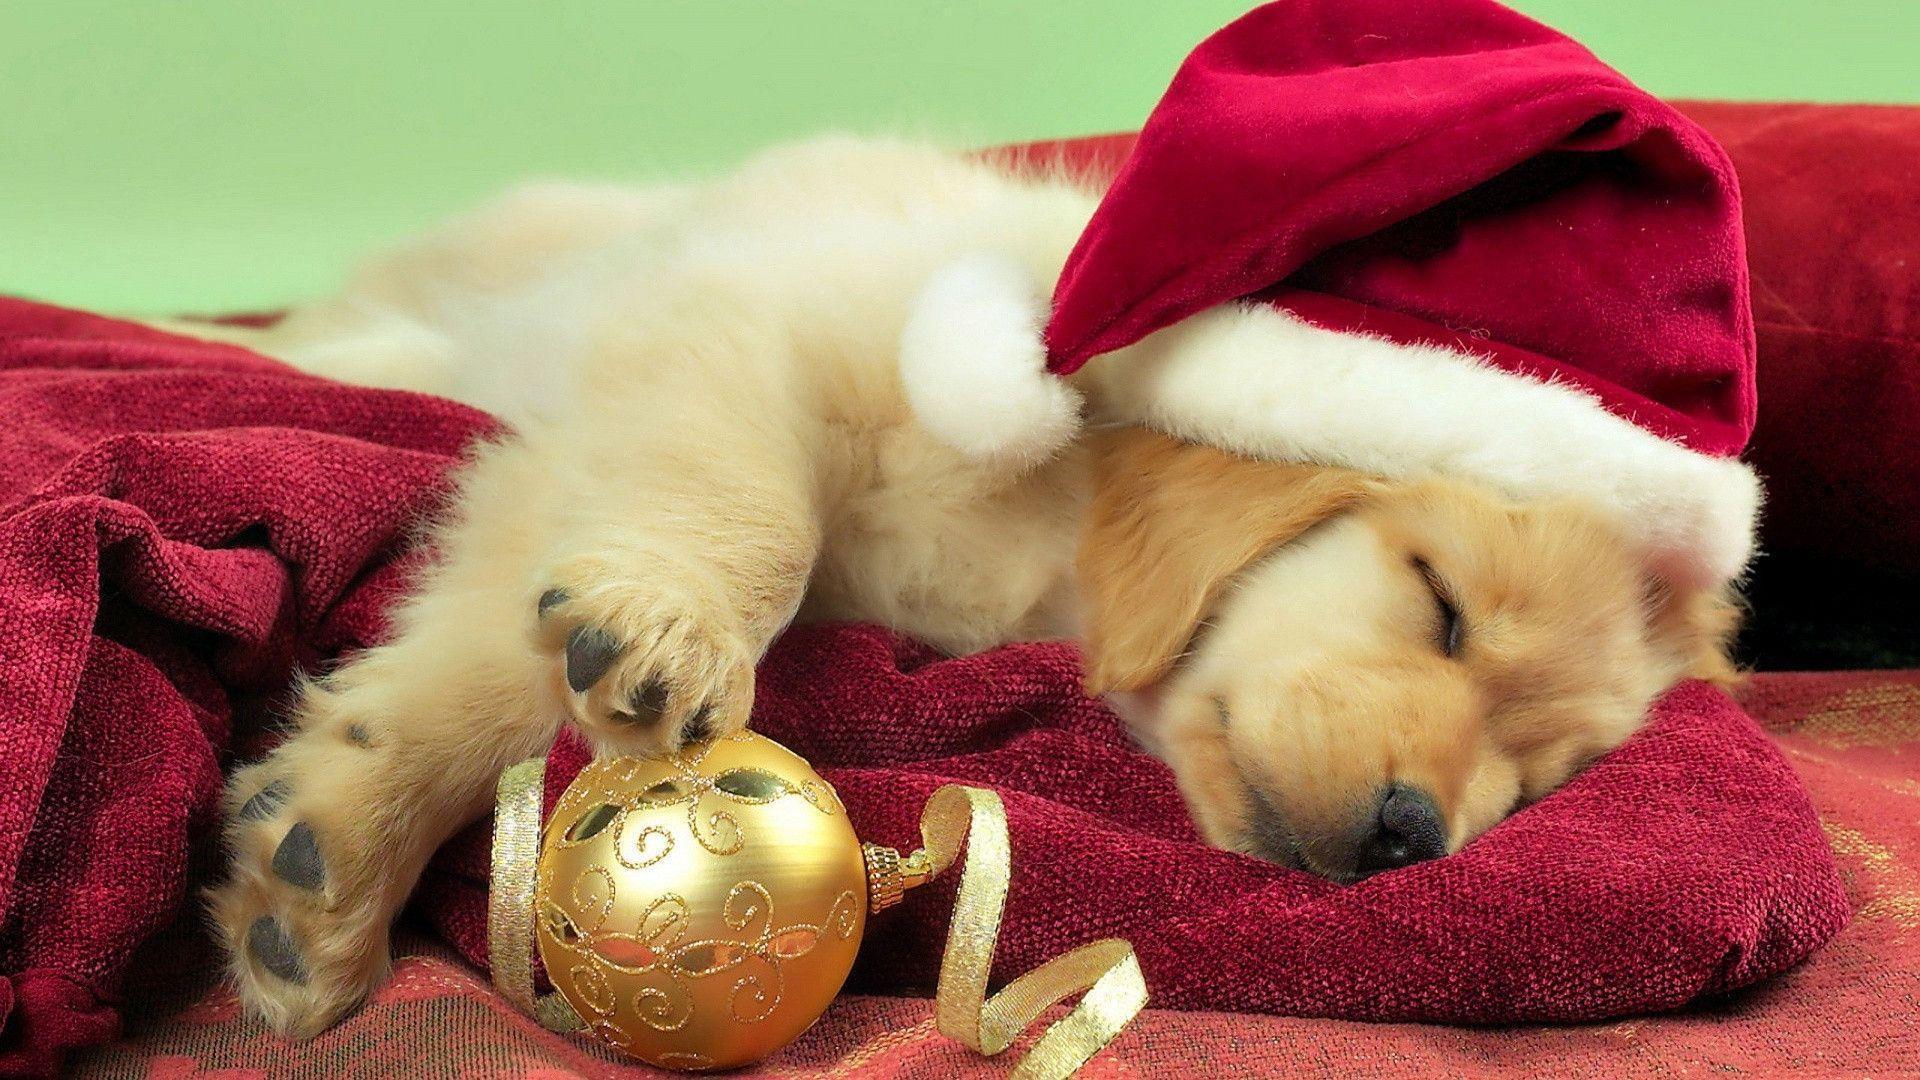 69400 Christmas Dog Stock Photos Pictures  RoyaltyFree Images  iStock   Christmas cat Christmas Dog holiday